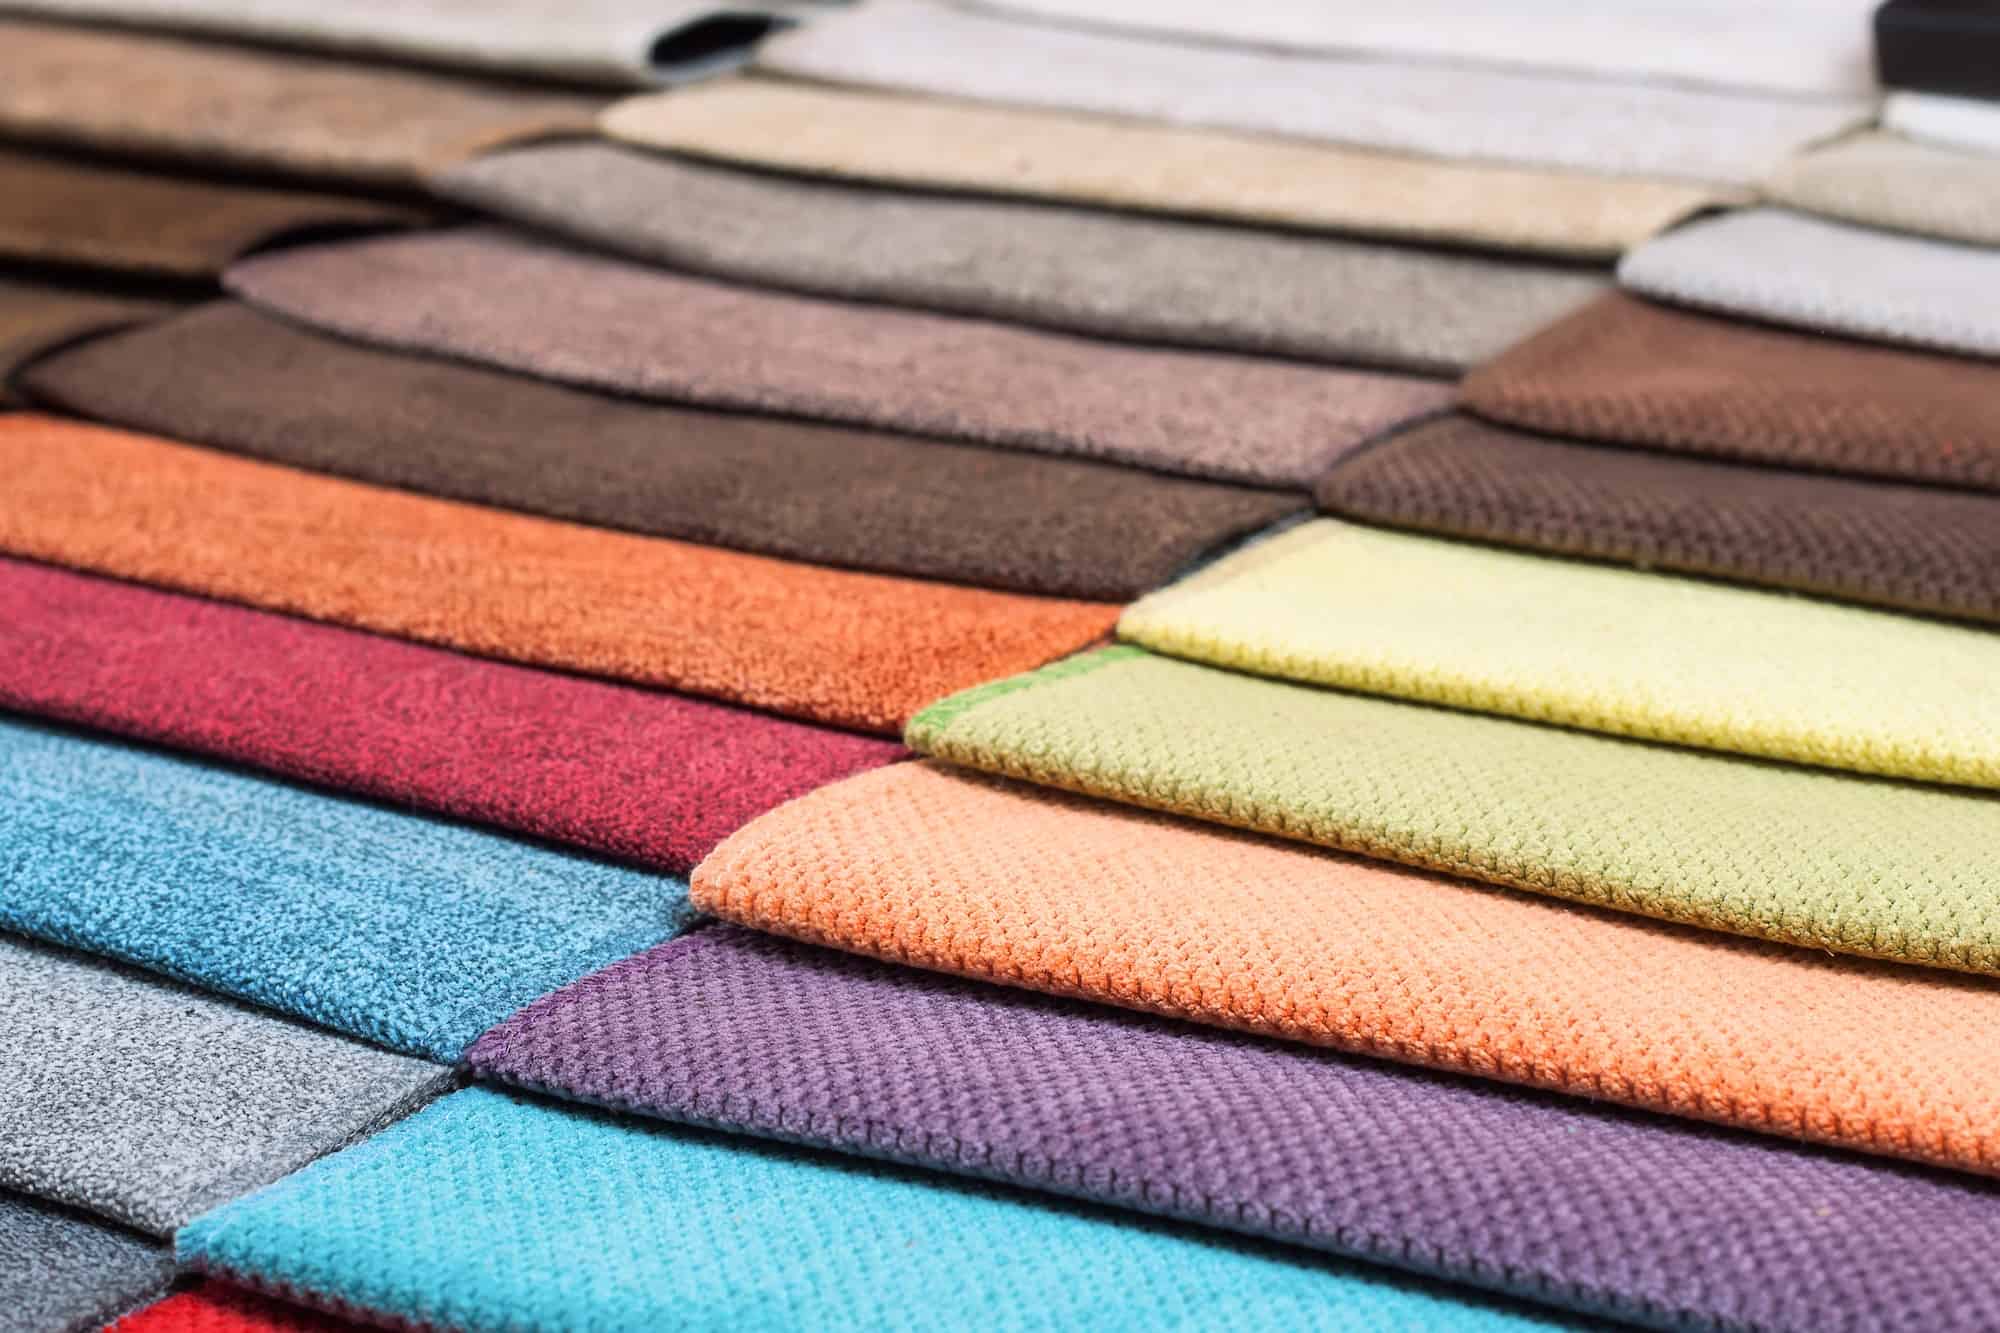 Color samples of the upholstery fabric in the assortment. palette of fabrics of various colors